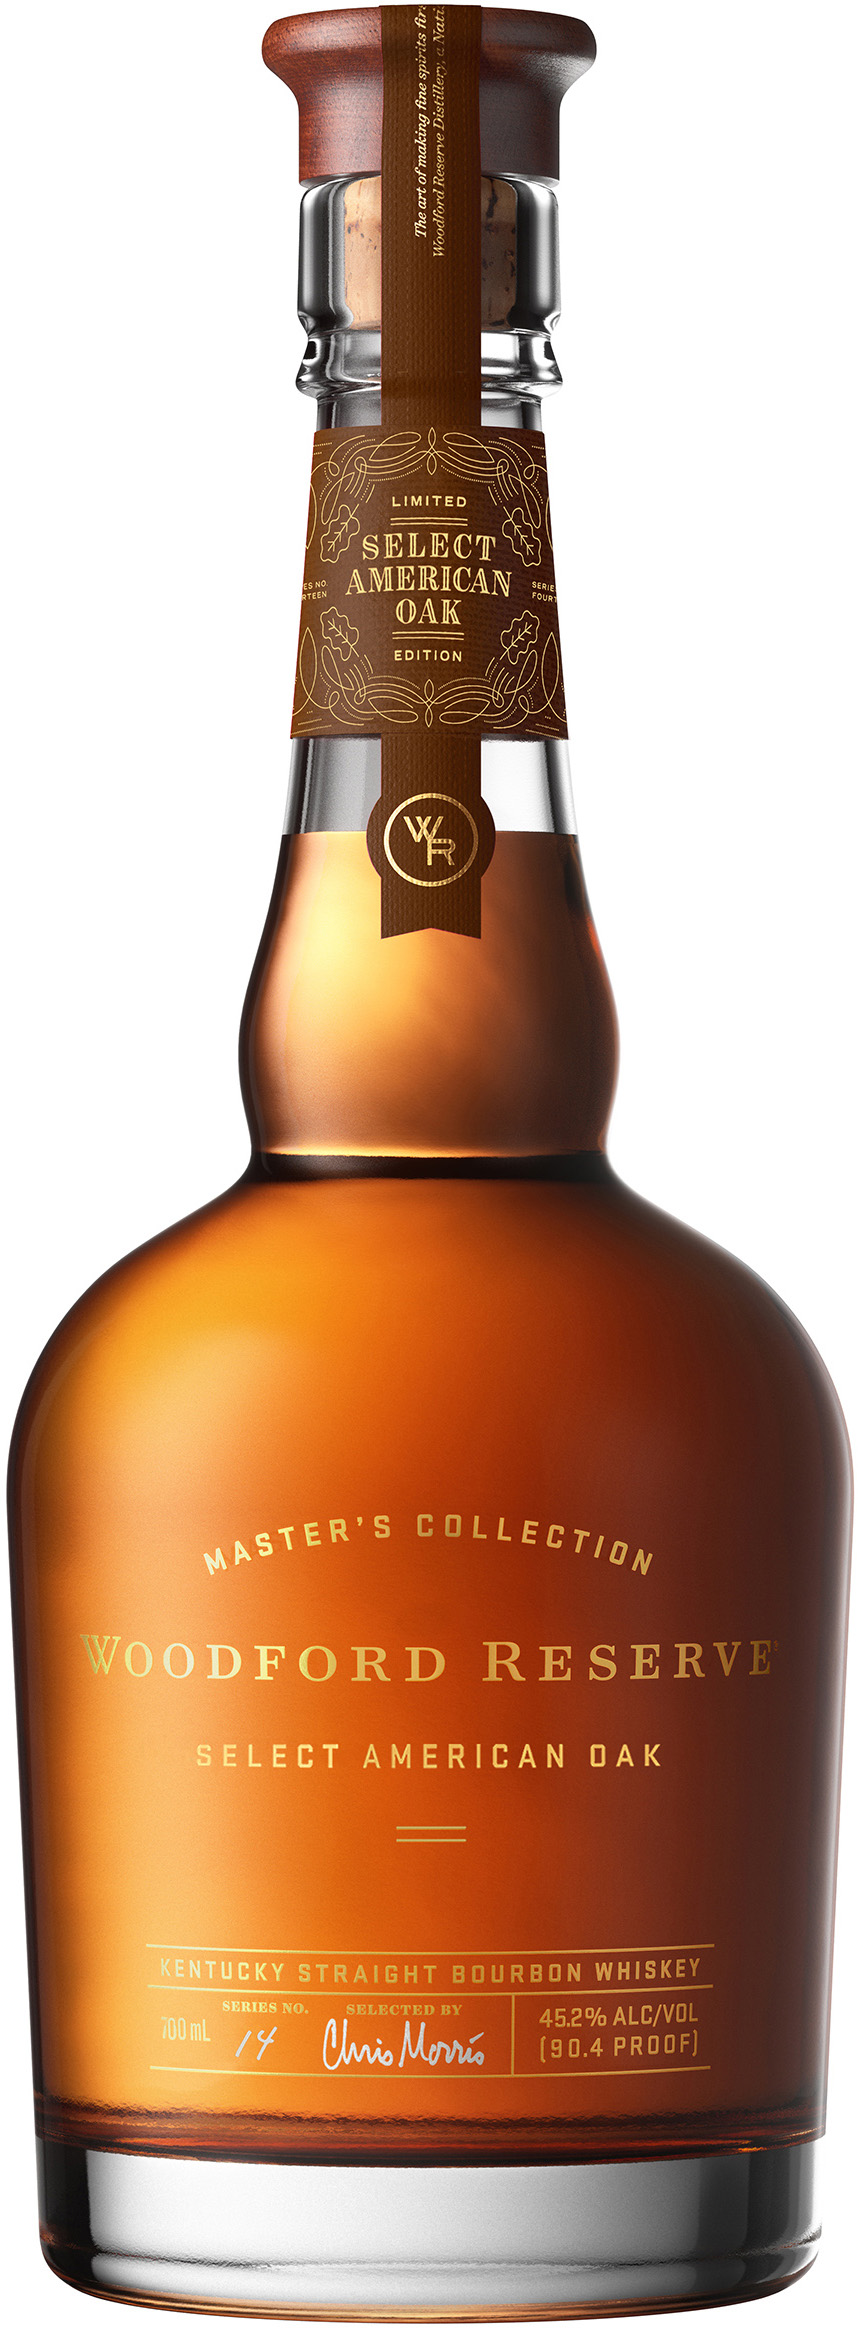 Woodford Reserve Master’s Collection Select American Oak